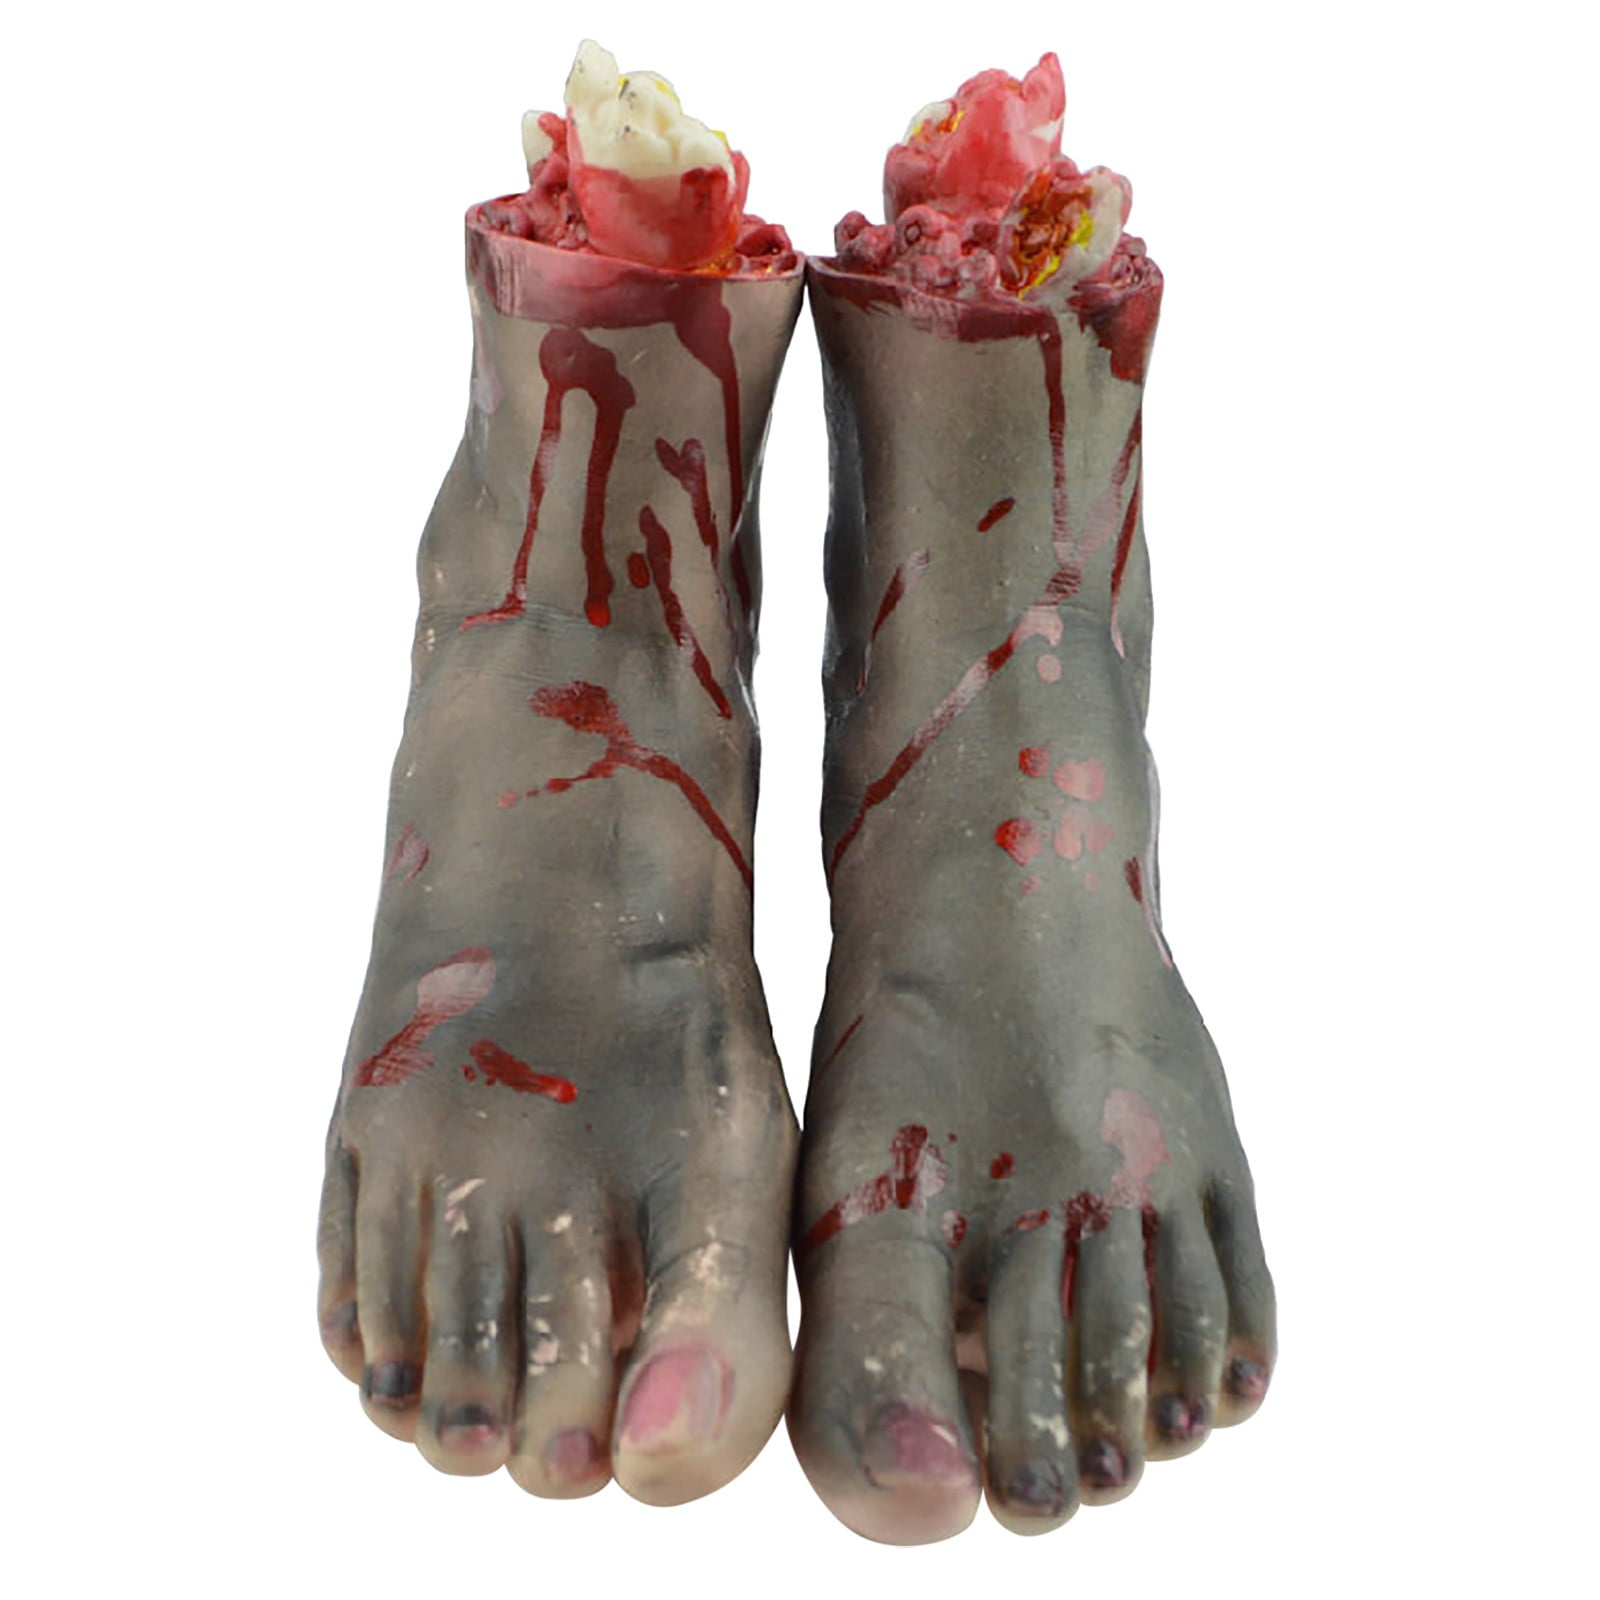 1Pair Bloody Horror Scary Halloween Props Fake Severed Arm Hand Haunted Decor US 